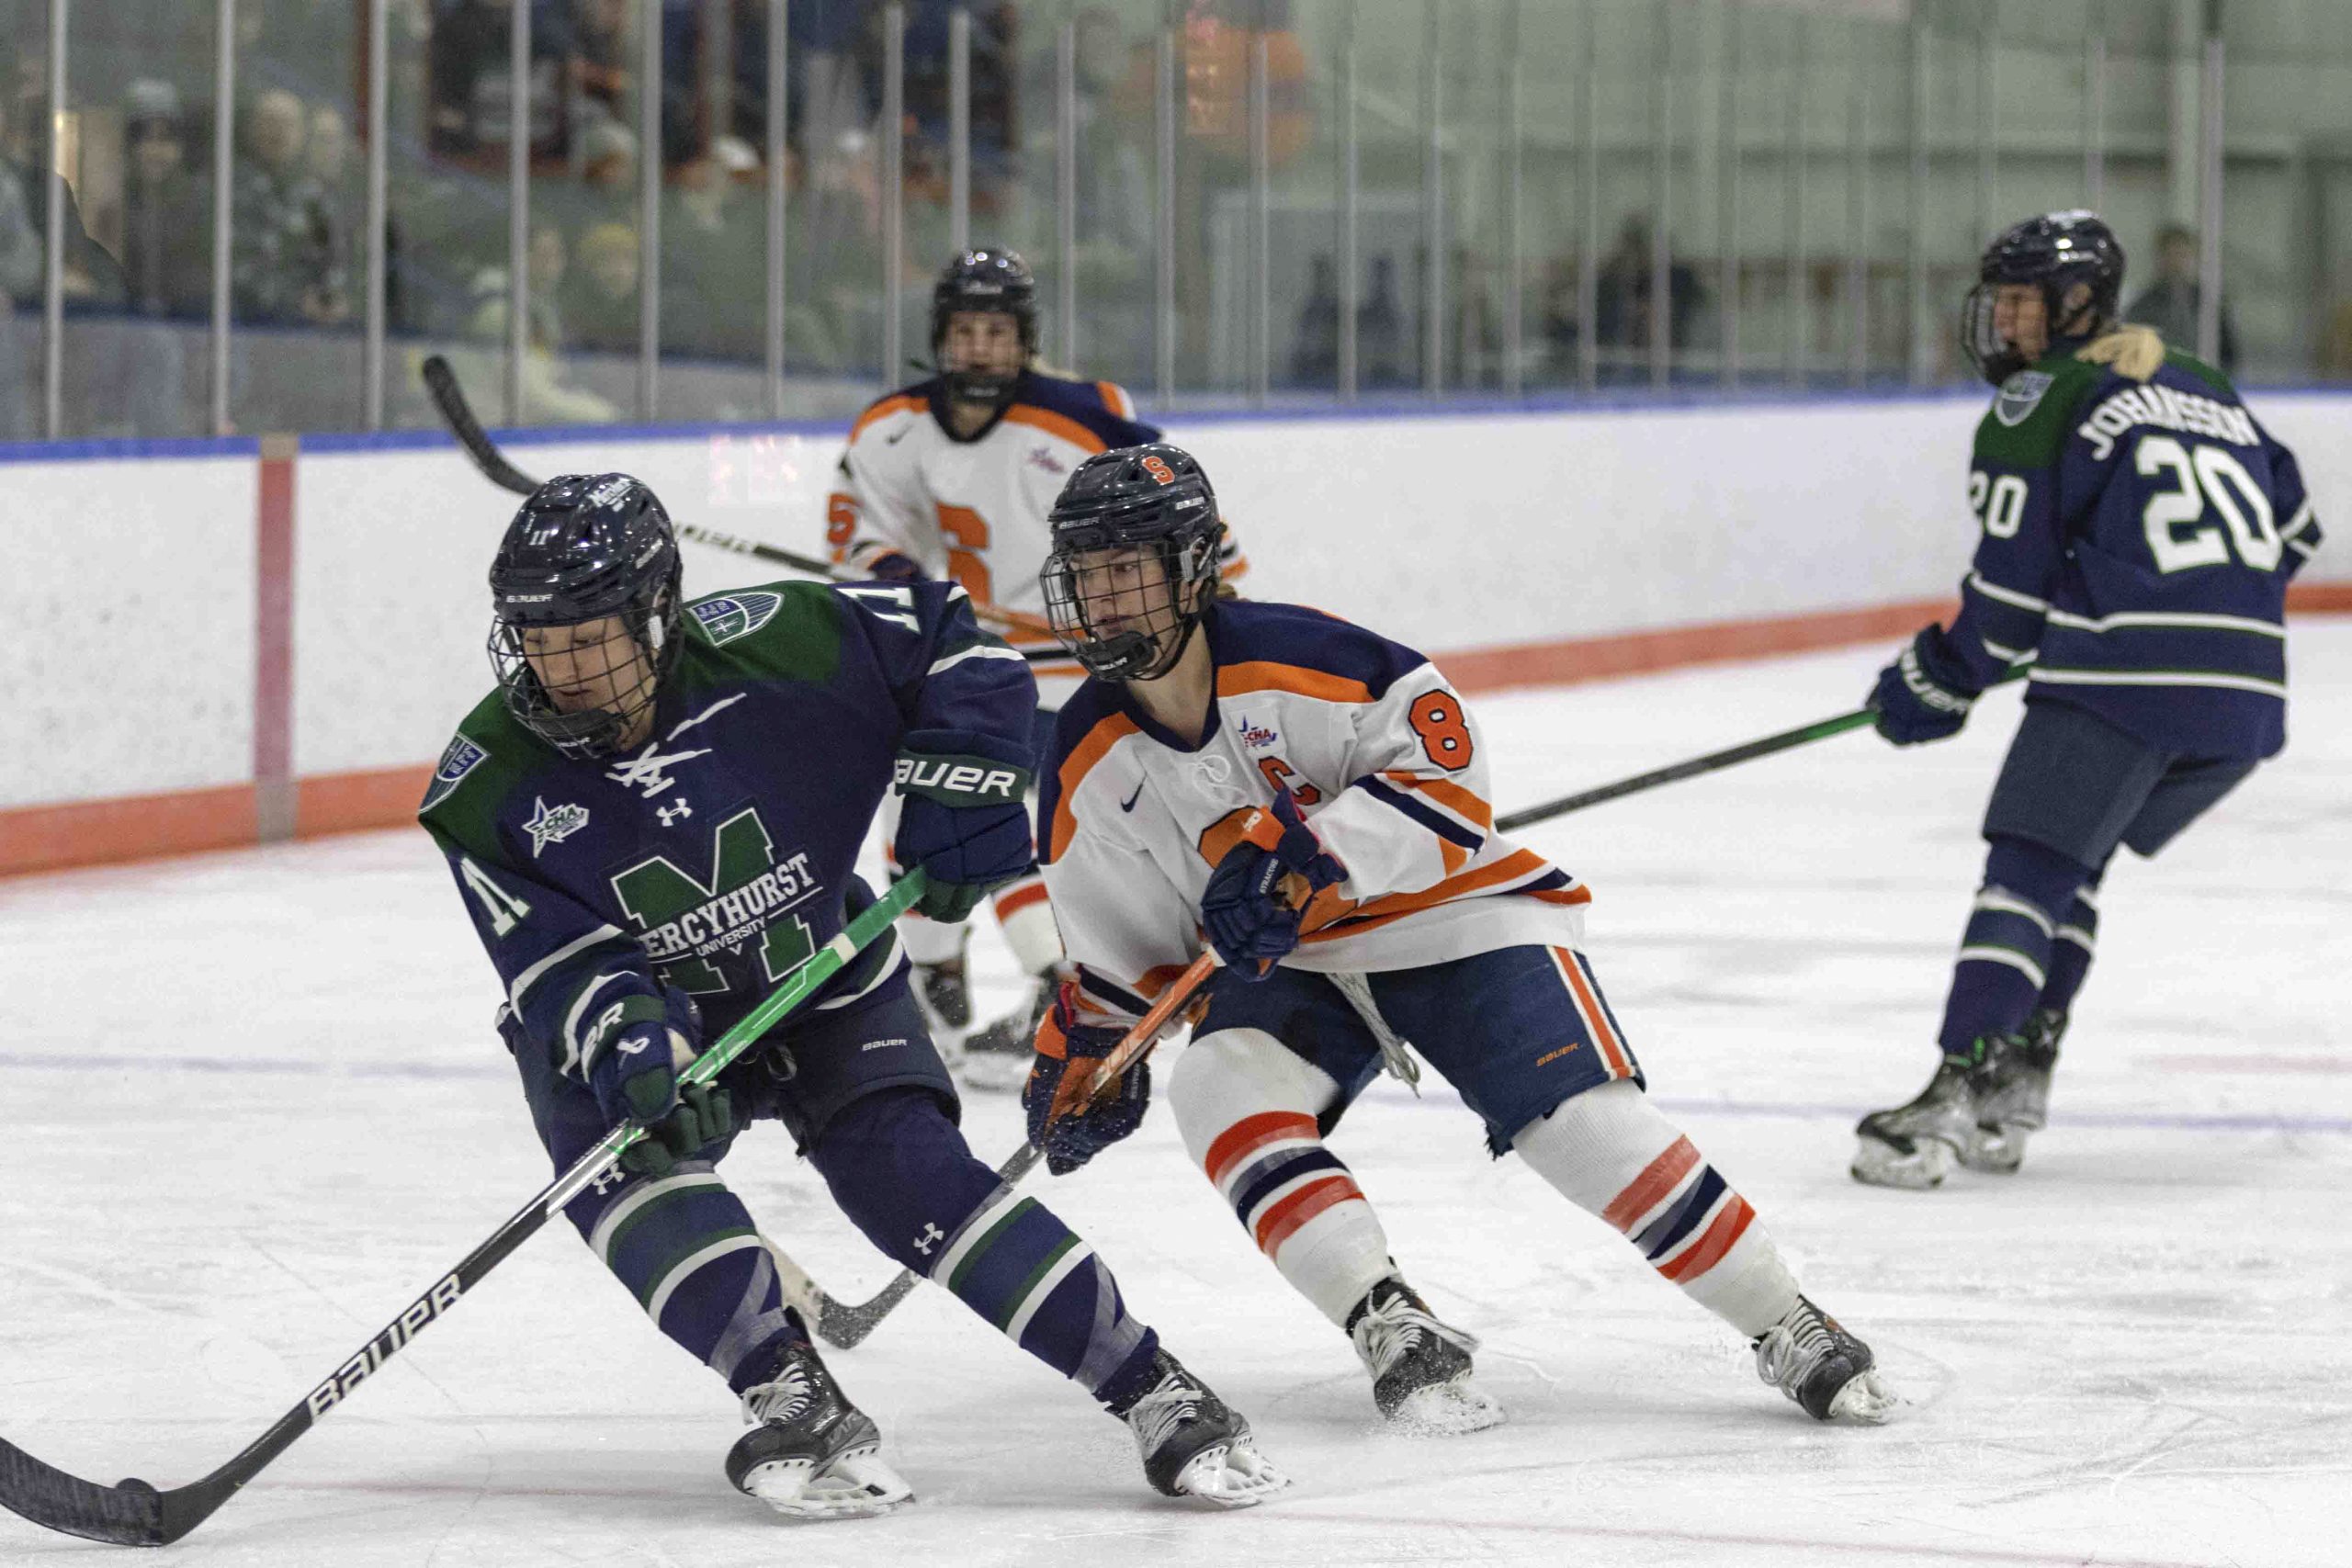 SU player, Lauren Bellefontaine (8) and Mercyhurst Makayla Javier (11) battling for possesion at Tennity ice rink.